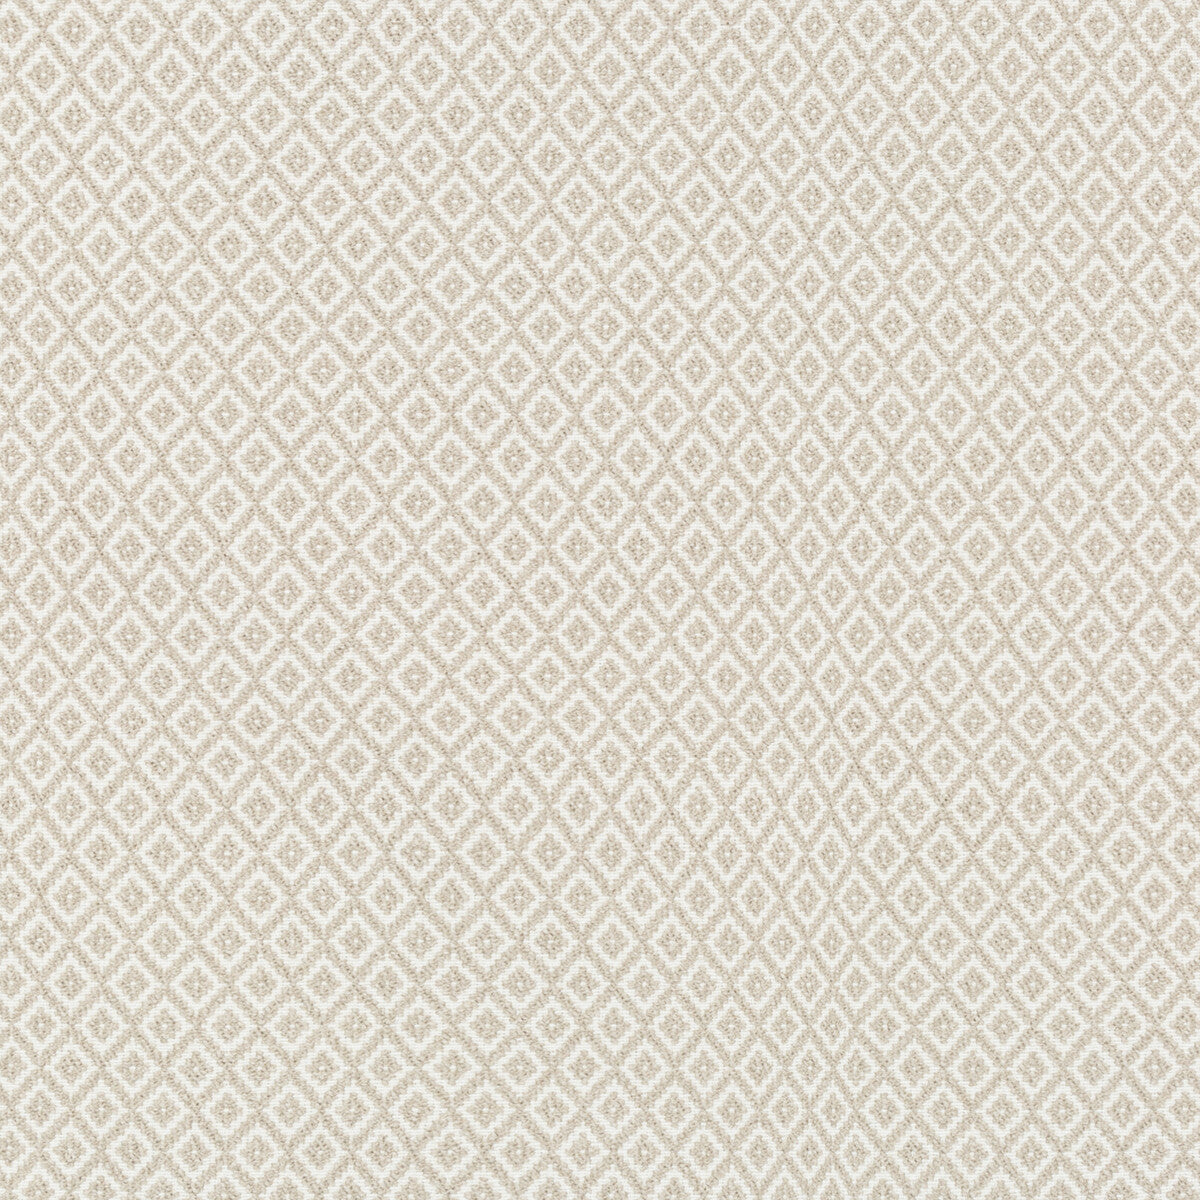 New Dimension fabric in natural color - pattern 35498.16.0 - by Kravet Couture in the Vista collection